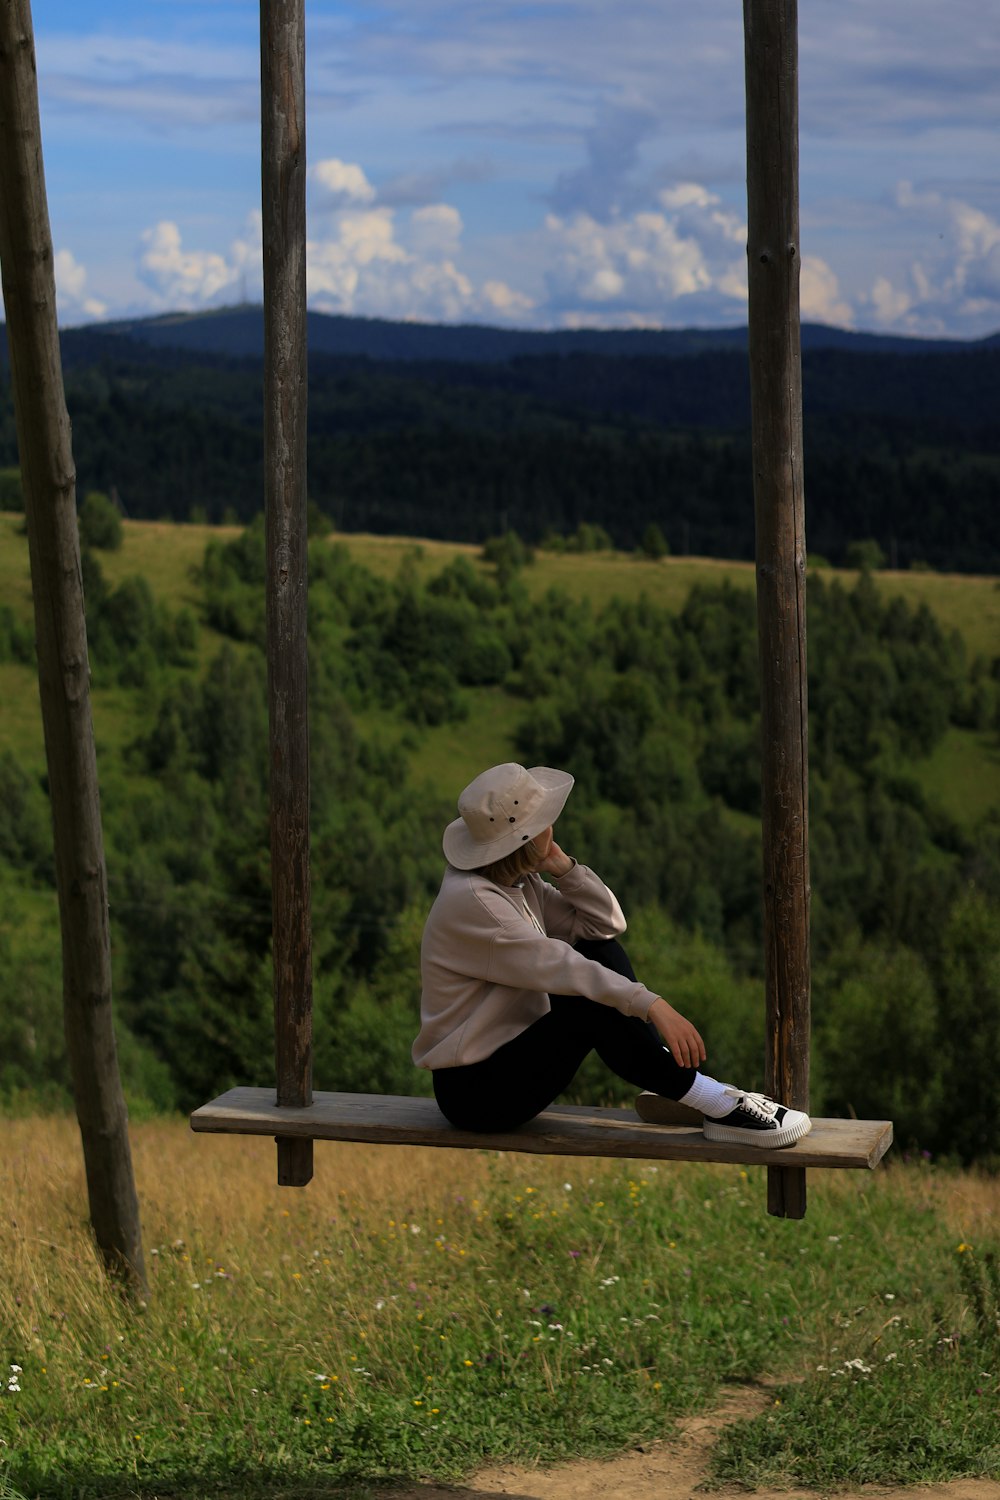 a person sitting on a wooden bench in a field